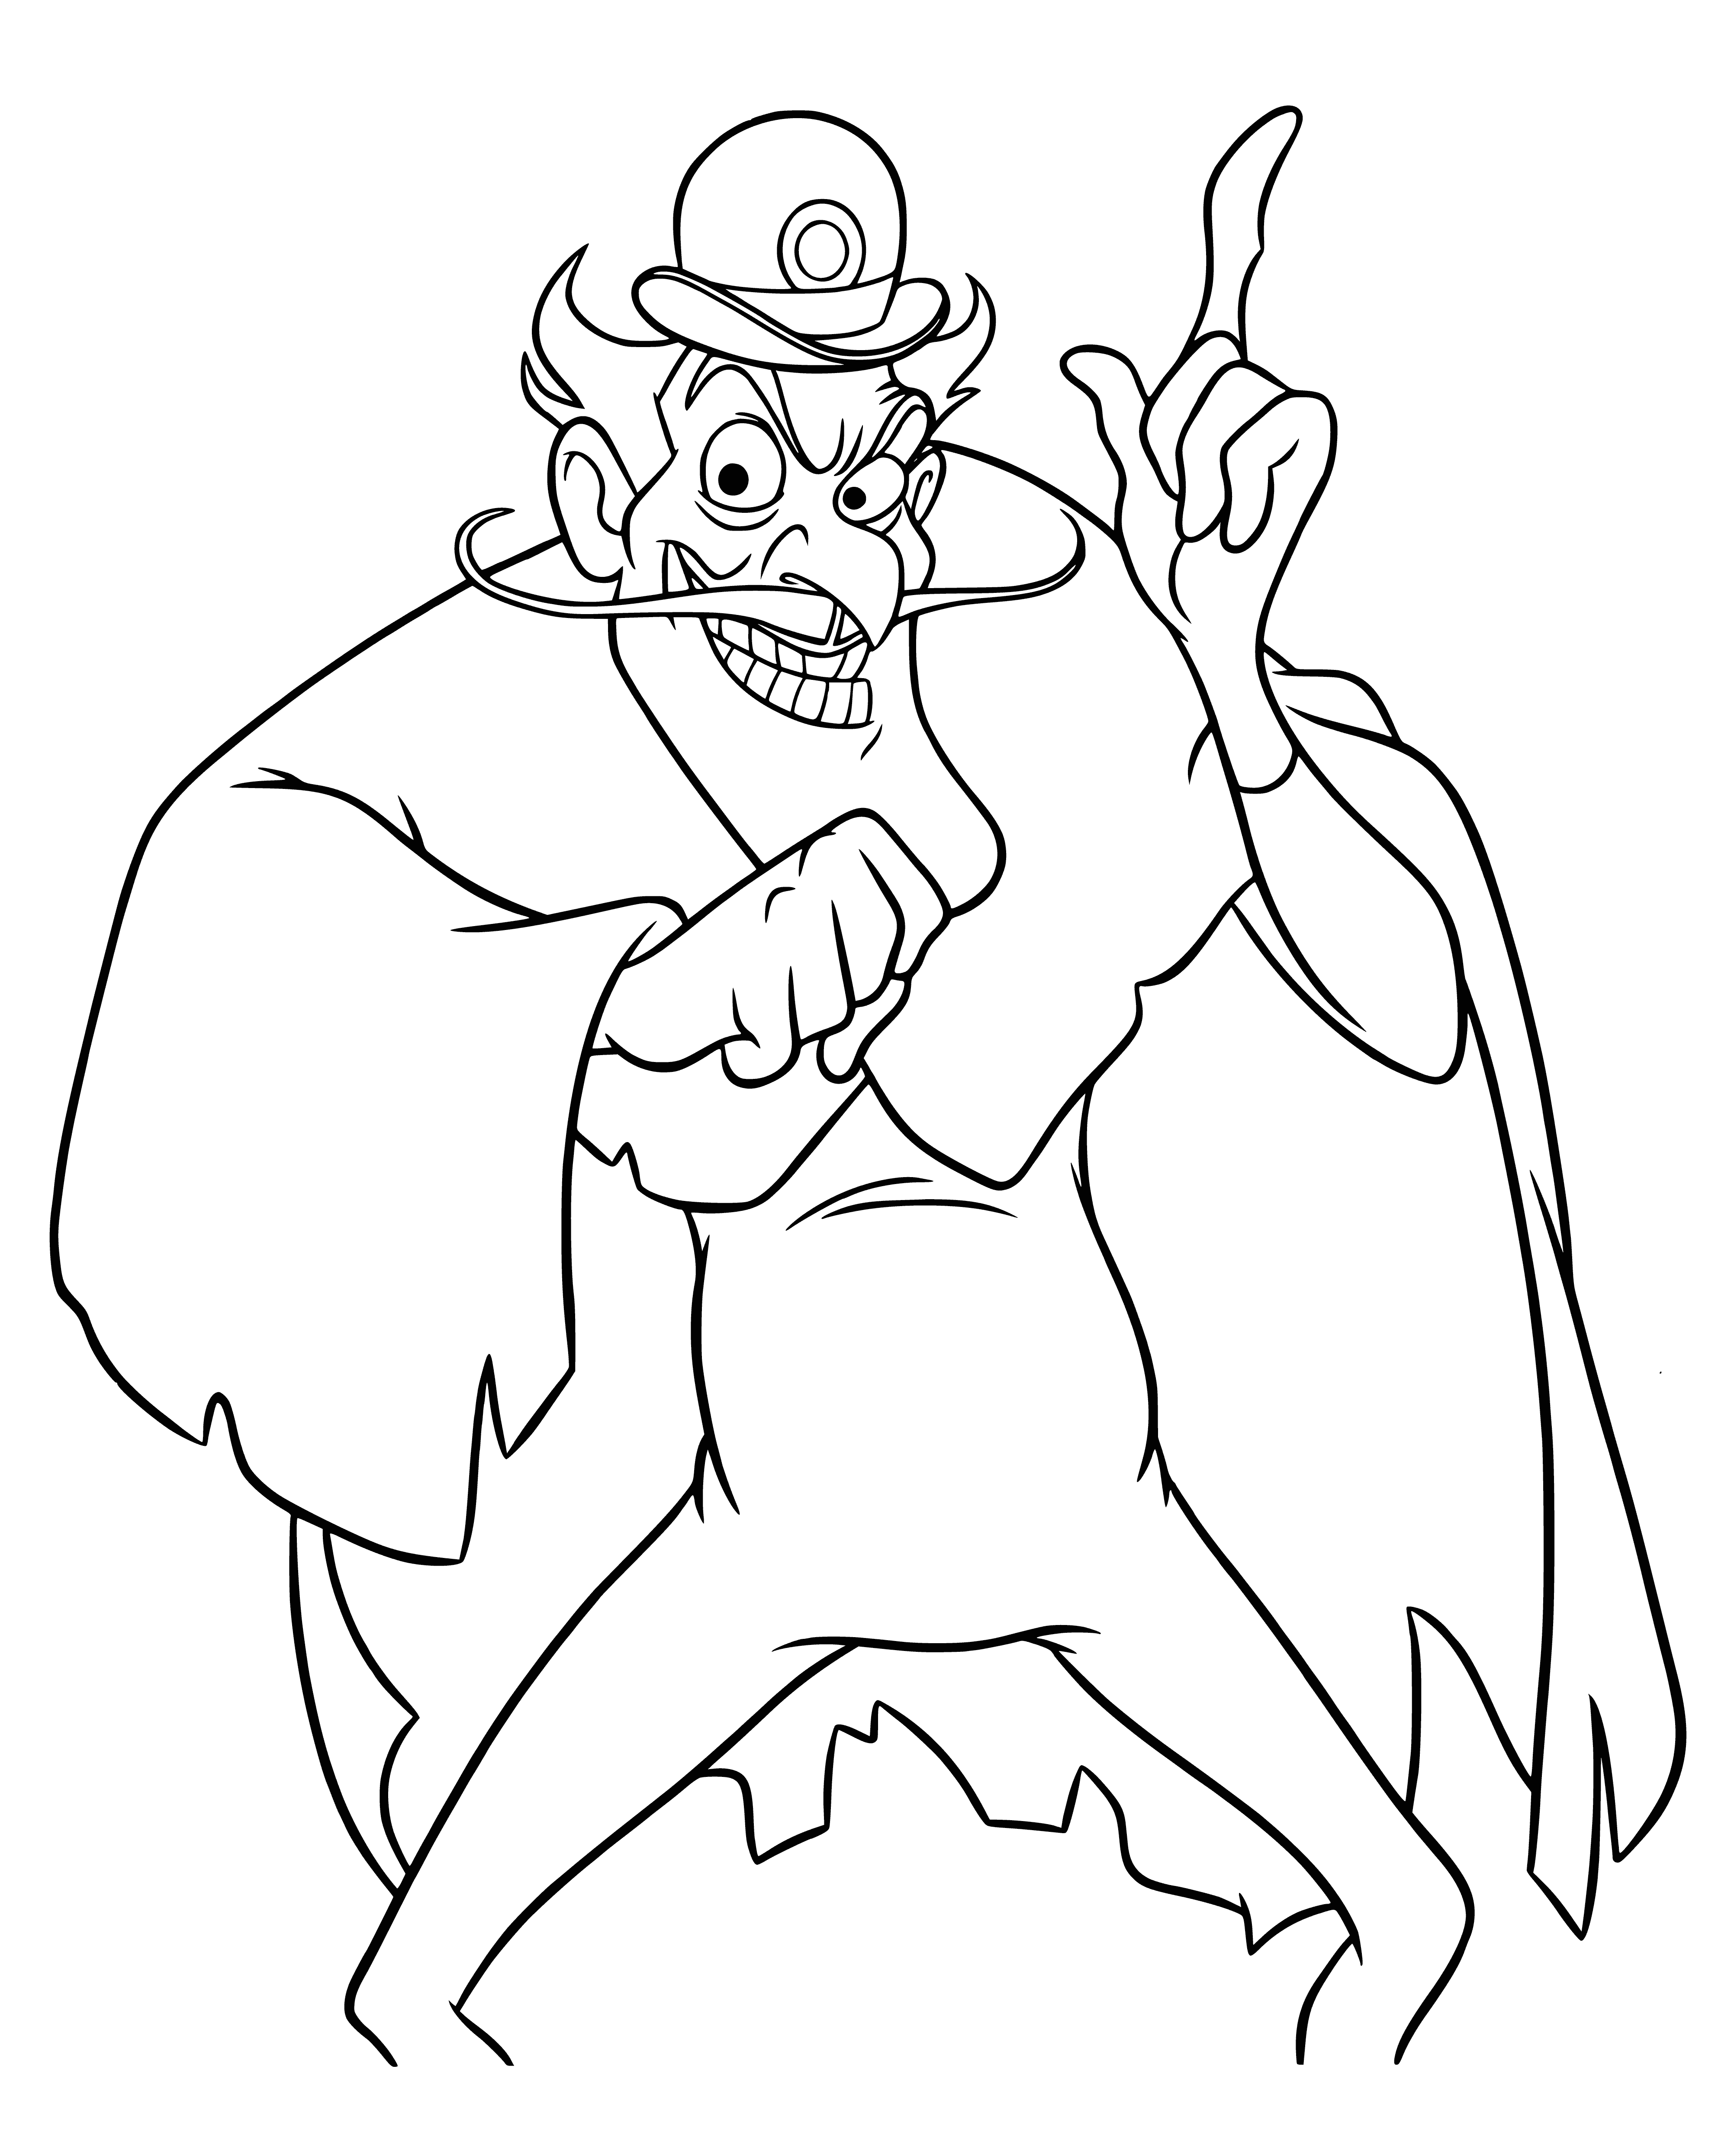 The villain in the bowler hat coloring page